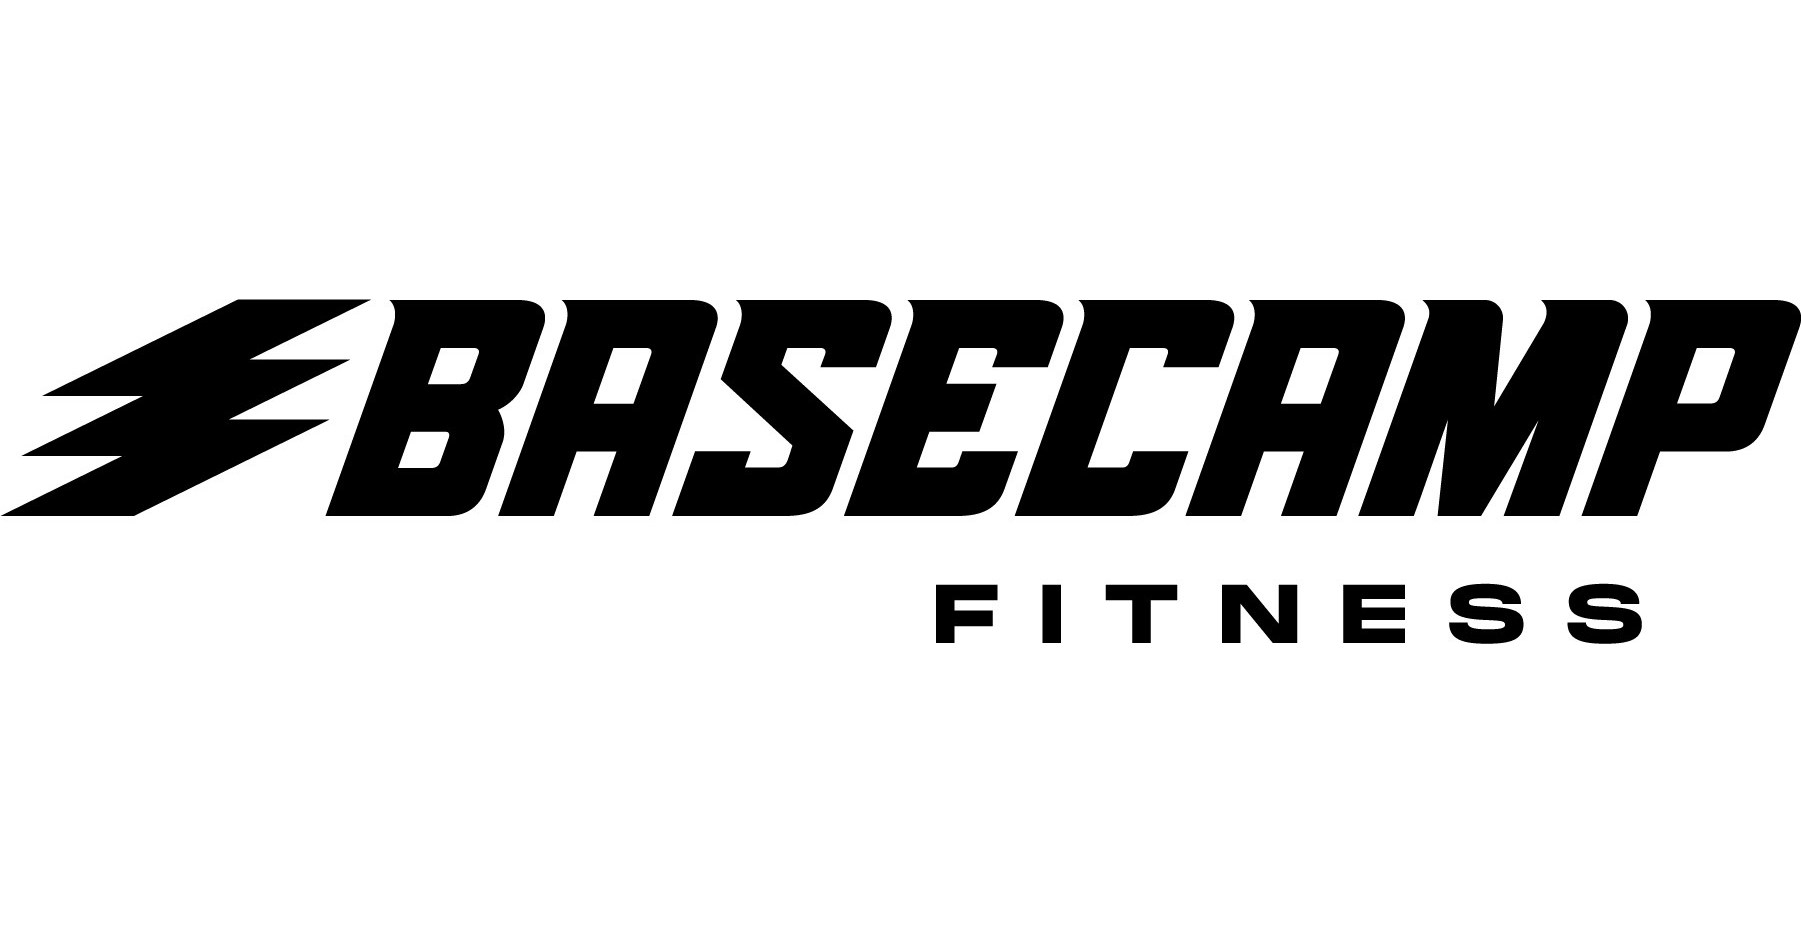 Basecamp Fitness Ignites National Expansion with 20-Unit Development Agreement in Florida